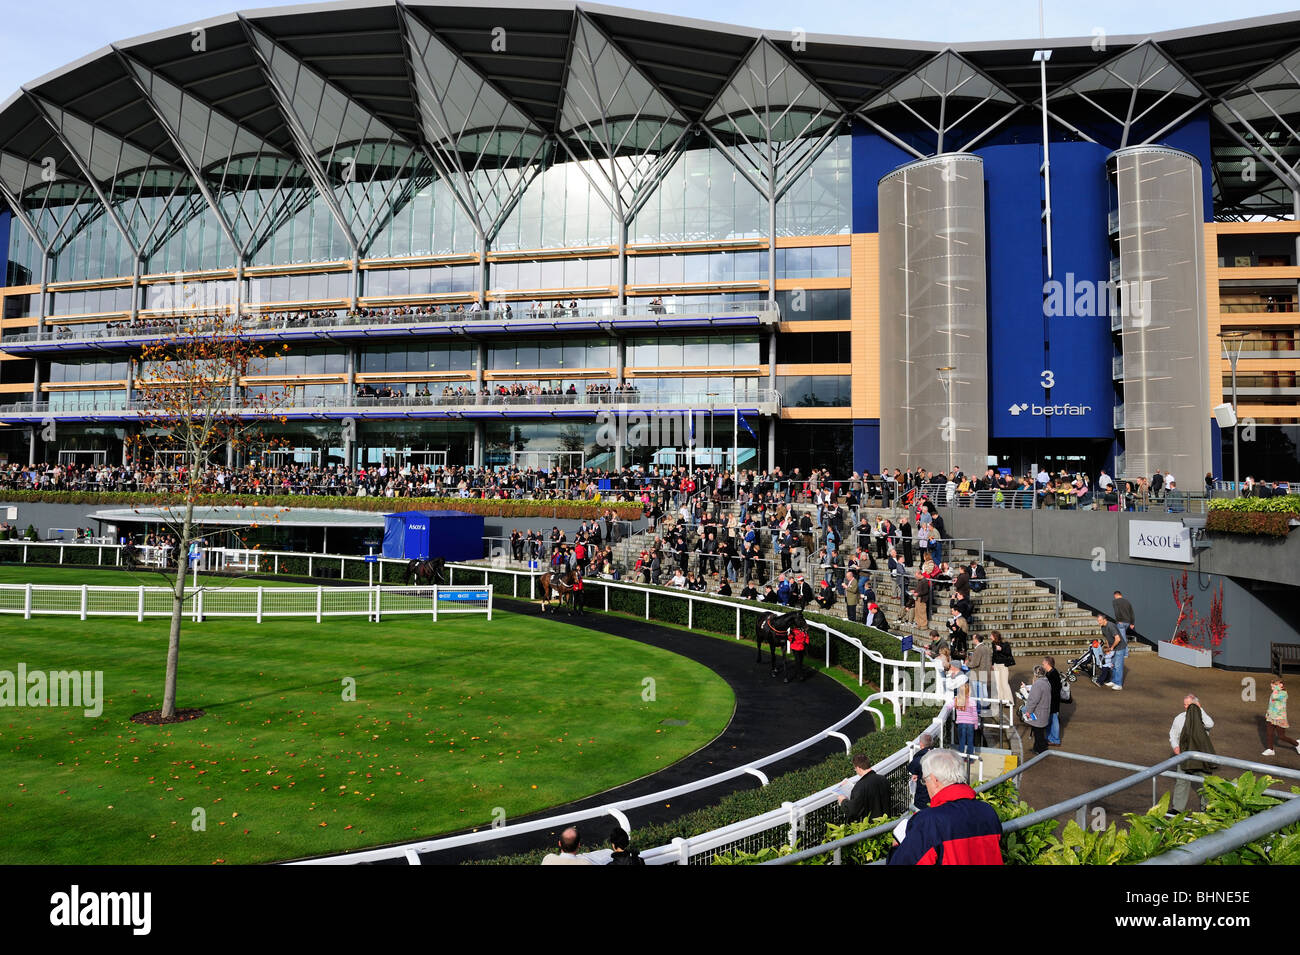 Paddock and main stand at Royal Ascot Race Course, Berkshire, England Stock Photo